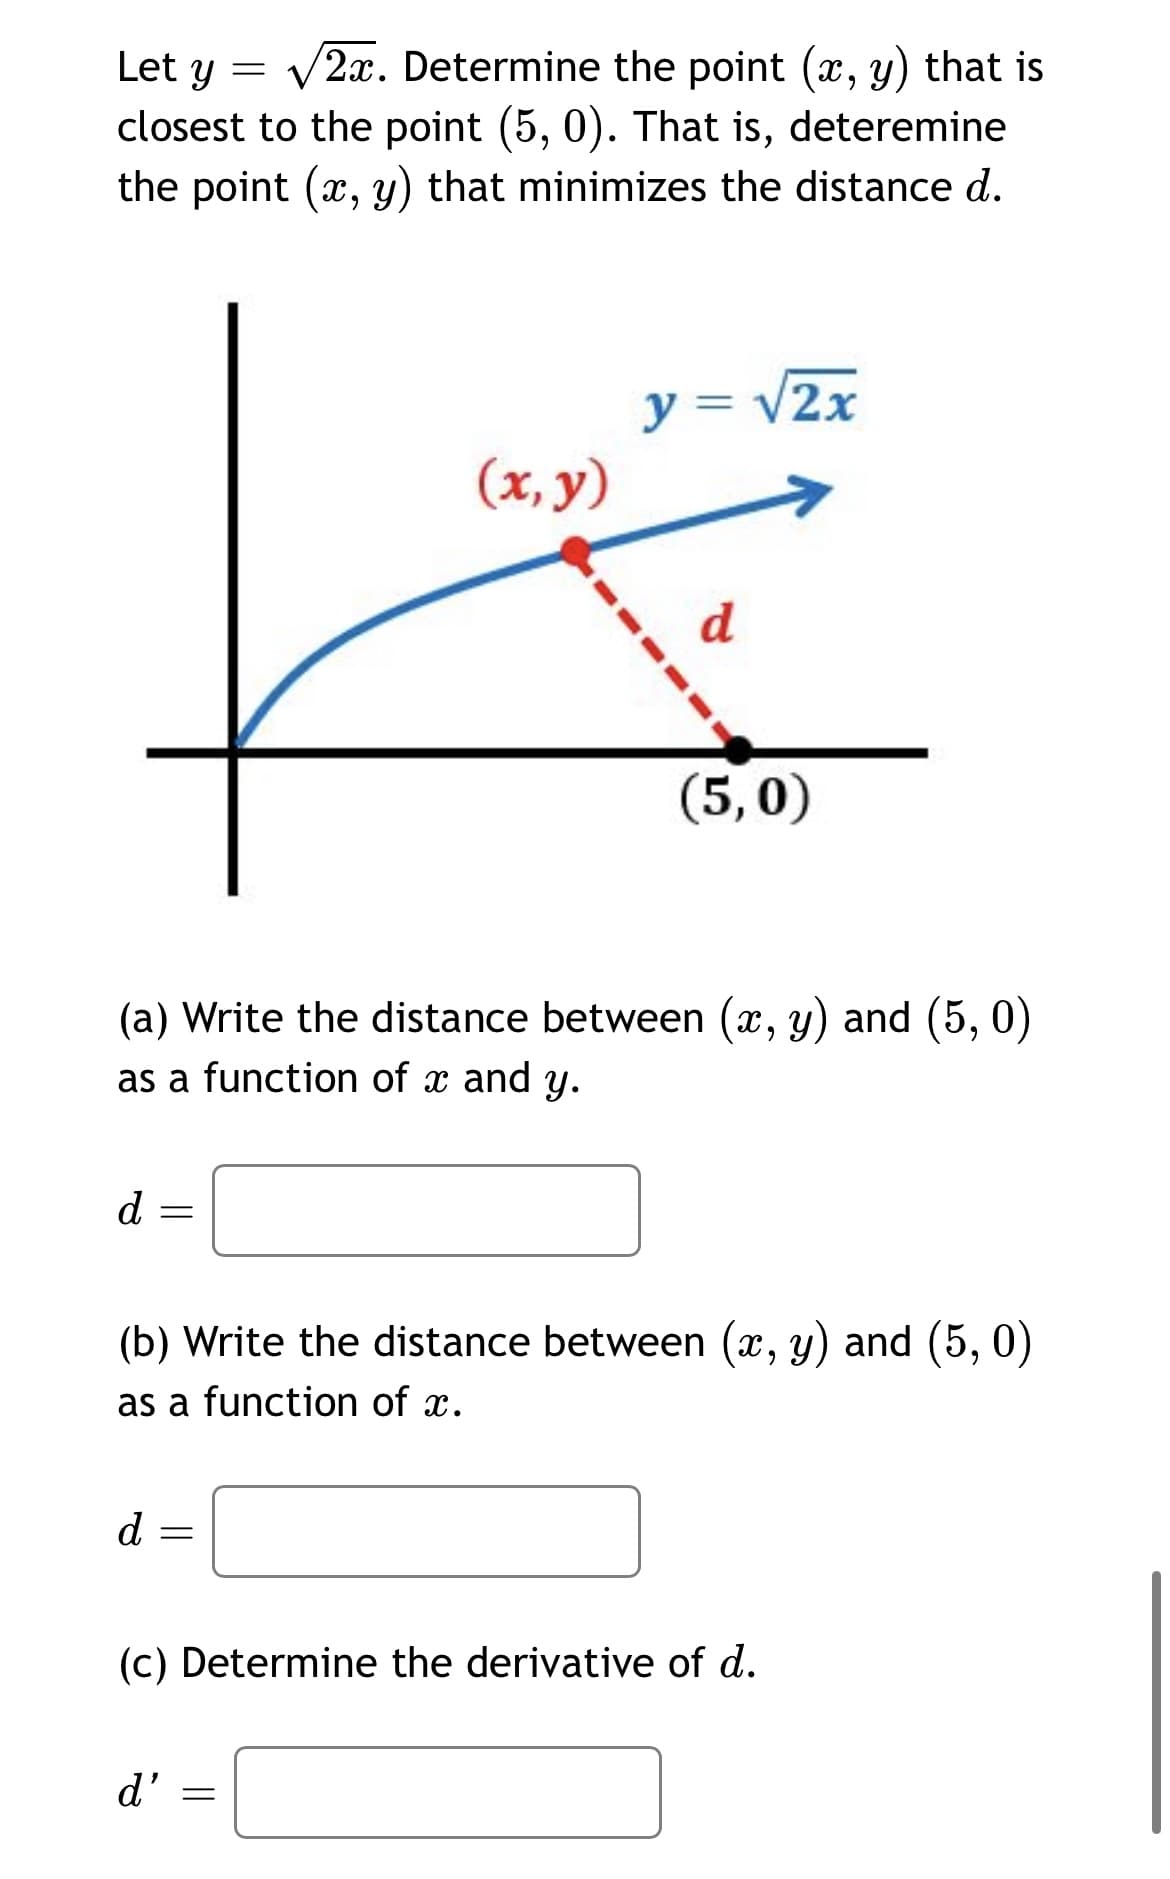 V2x. Determine the point (x, y) that is
closest to the point (5, 0). That is, deteremine
the point (x, y) that minimizes the distance d.
Let y
y = V2x
(x, y)
(5,0)
(a) Write the distance between (x, y) and (5, 0)
as a function of x and y.
d
(b) Write the distance between (x, y) and (5, 0)
as a function of x.
d
(c) Determine the derivative of d.
d'
